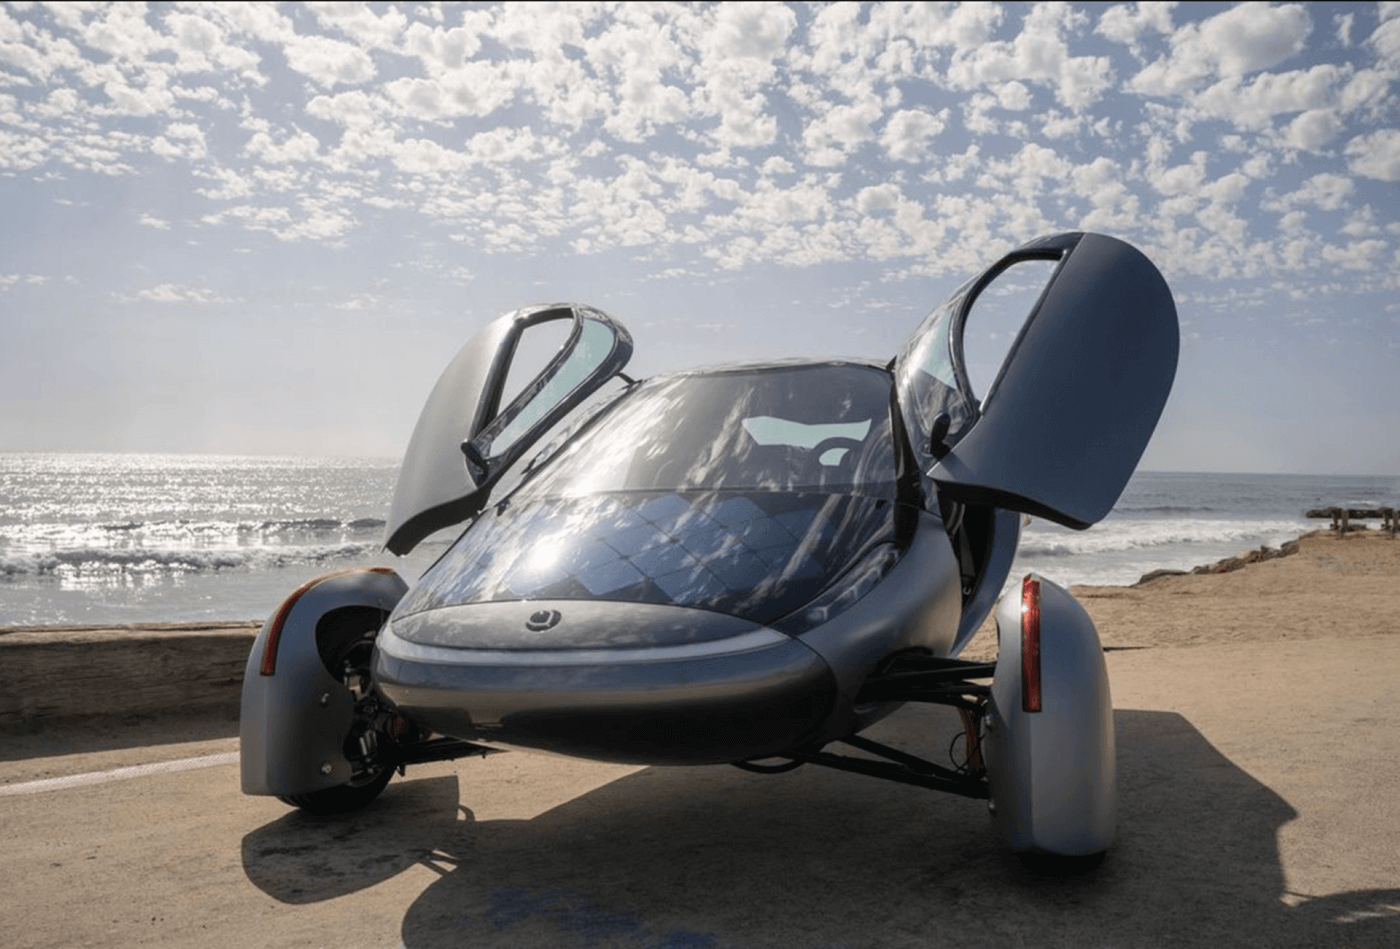 Solar Cars,How to talk about climate change